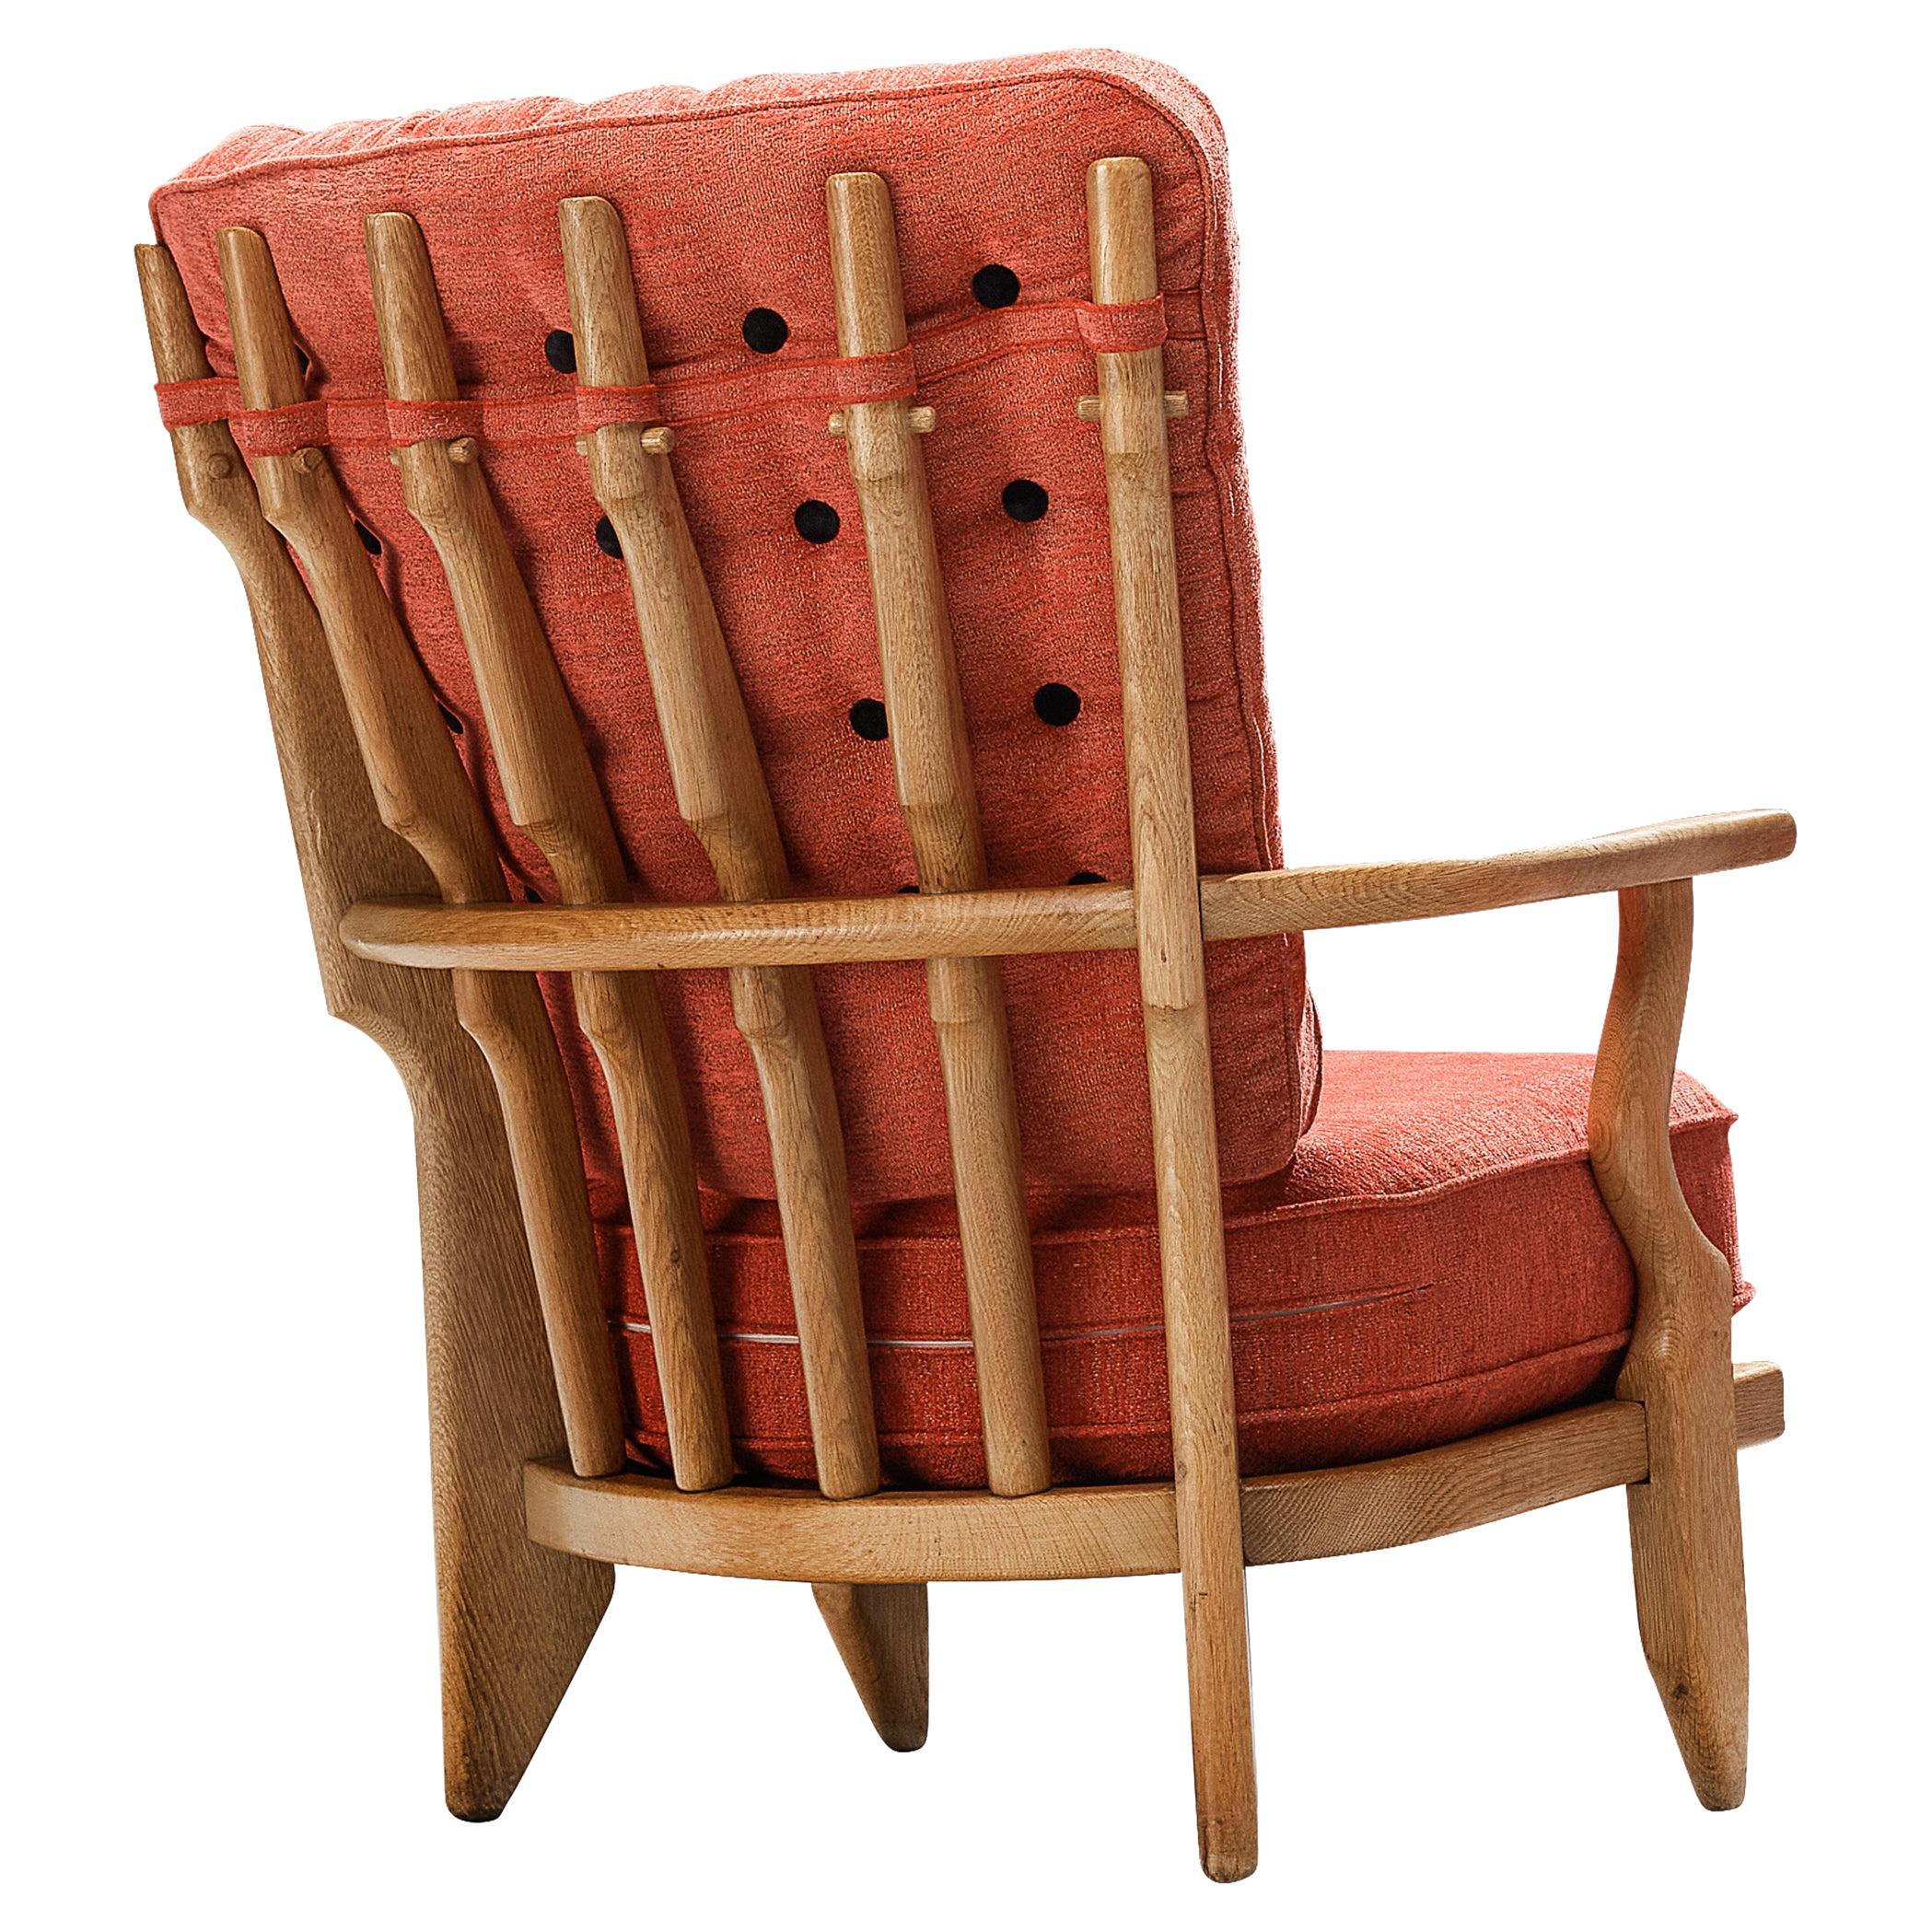 Guillerme & Chambron 'Mid Repos' Lounge Chair in Oak and Red Upholstery  For Sale